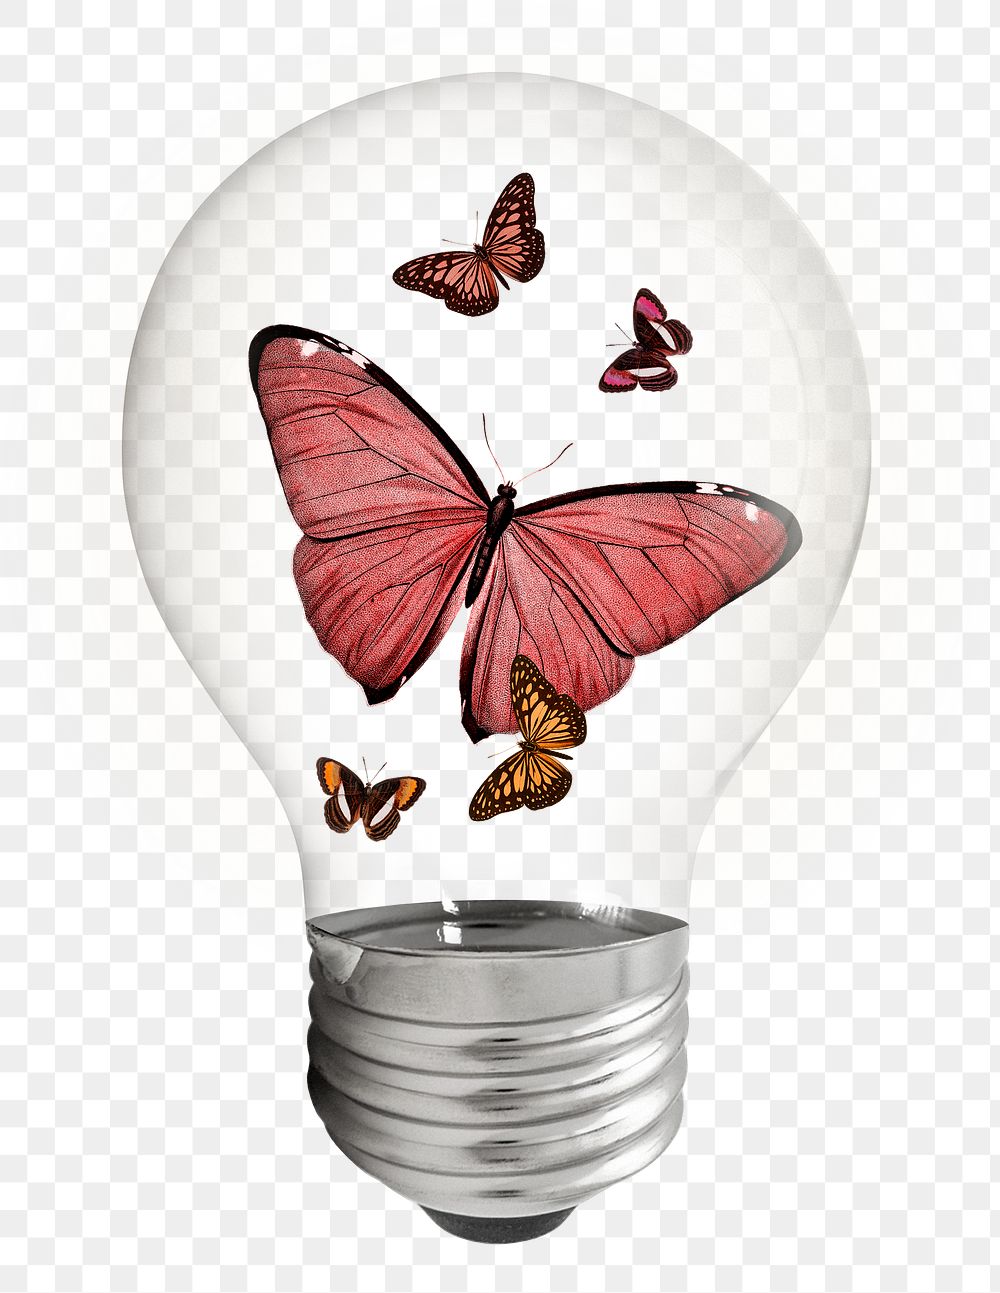 Butterflies bulb png sticker, insect, aesthetic design on transparent background